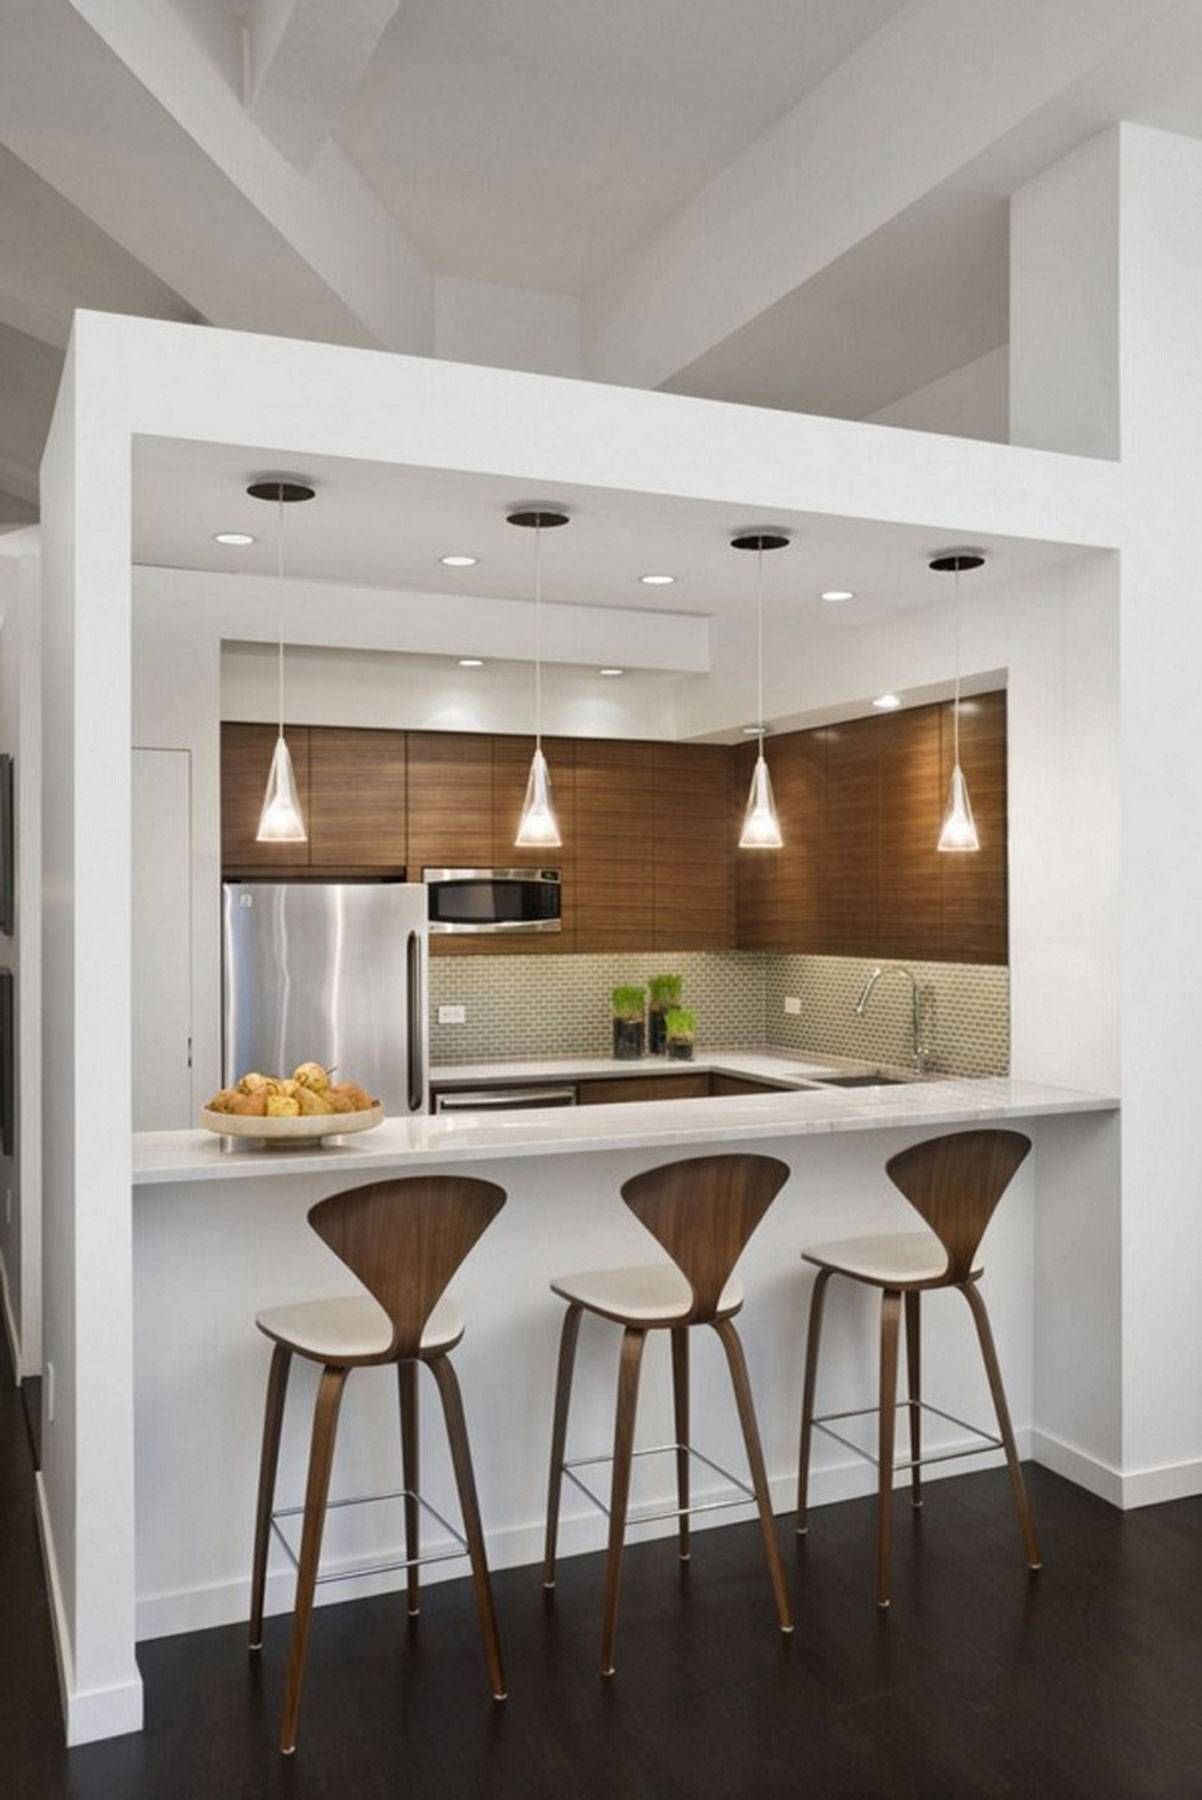 Kitchen Island: White Glass Pendant Lights Over White Breakfast Regarding Lights Over Breakfast Bar (View 6 of 15)